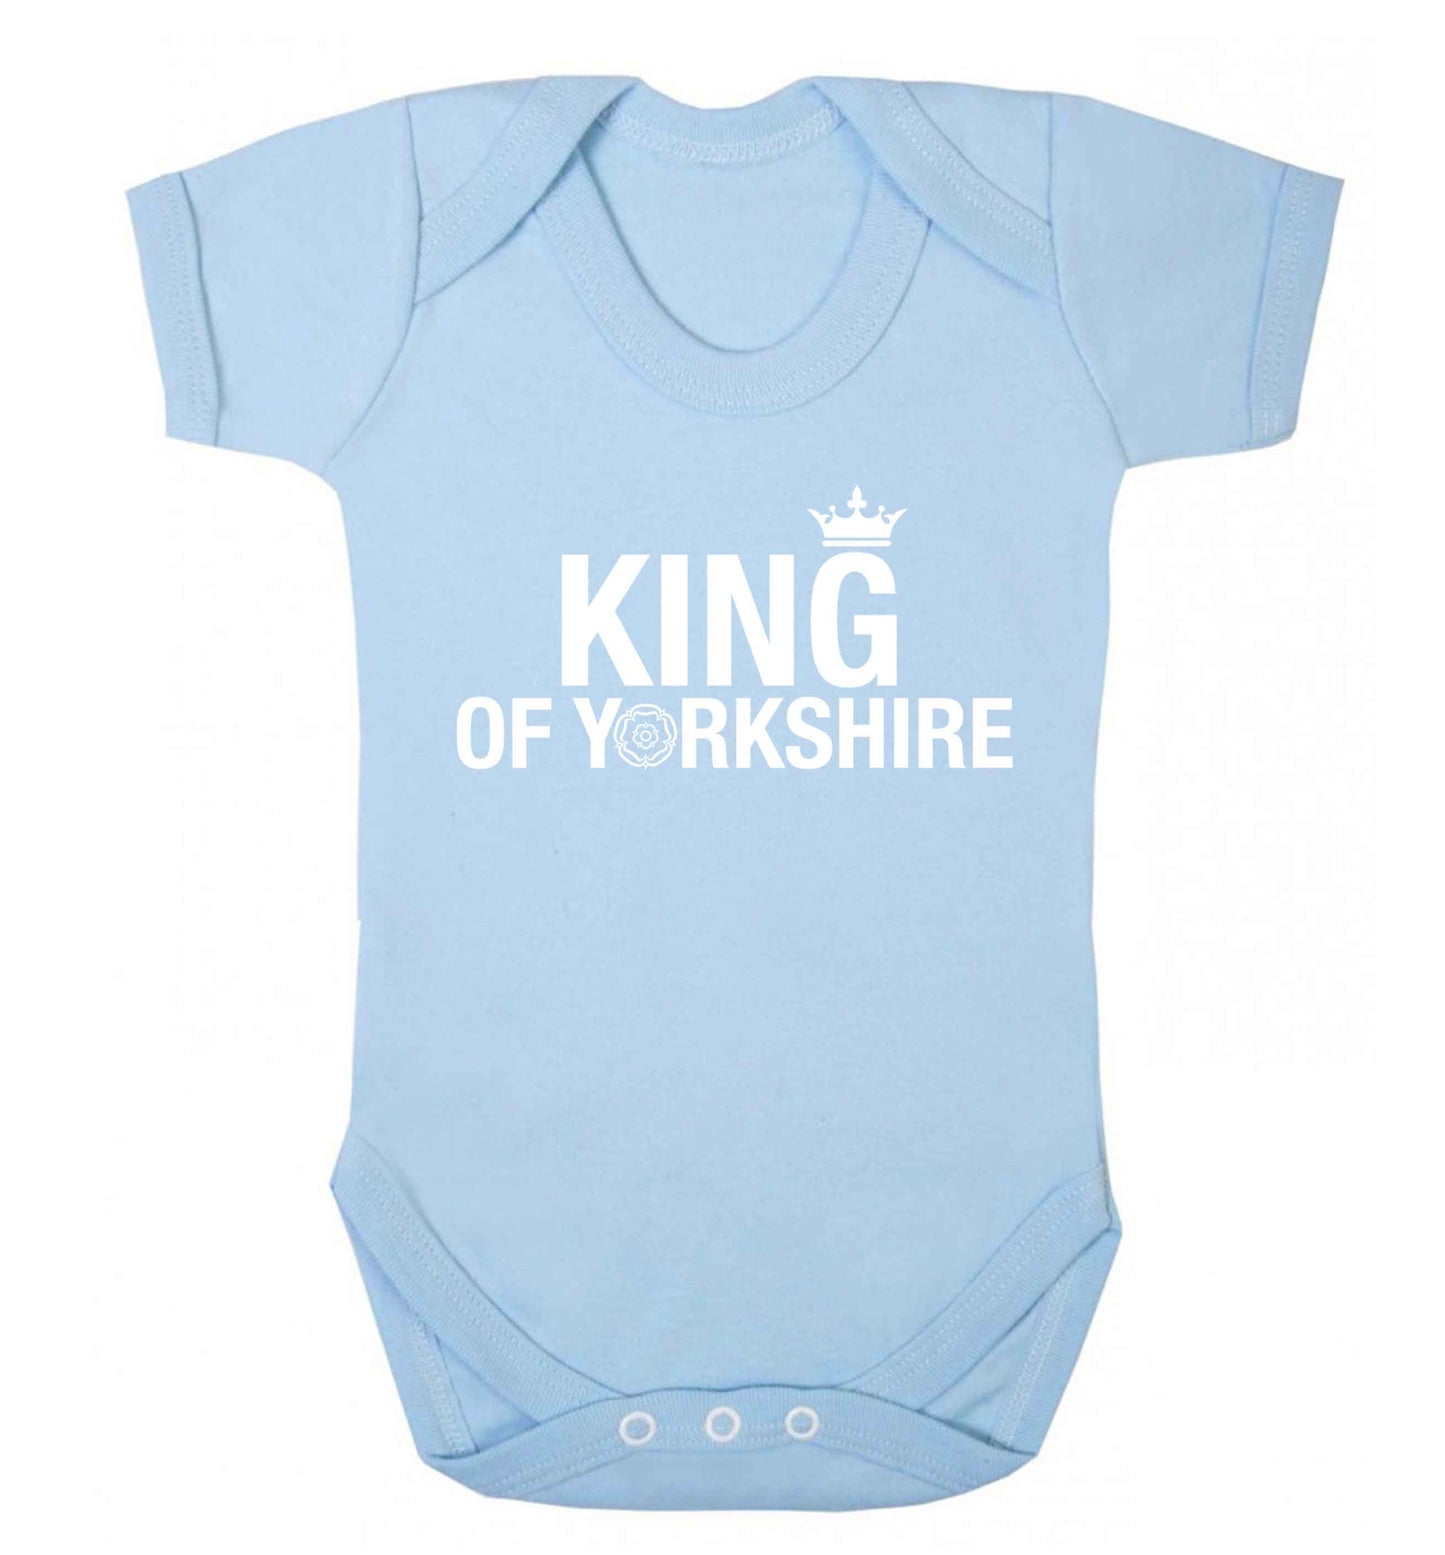 King of Yorkshire Baby Vest pale blue 18-24 months